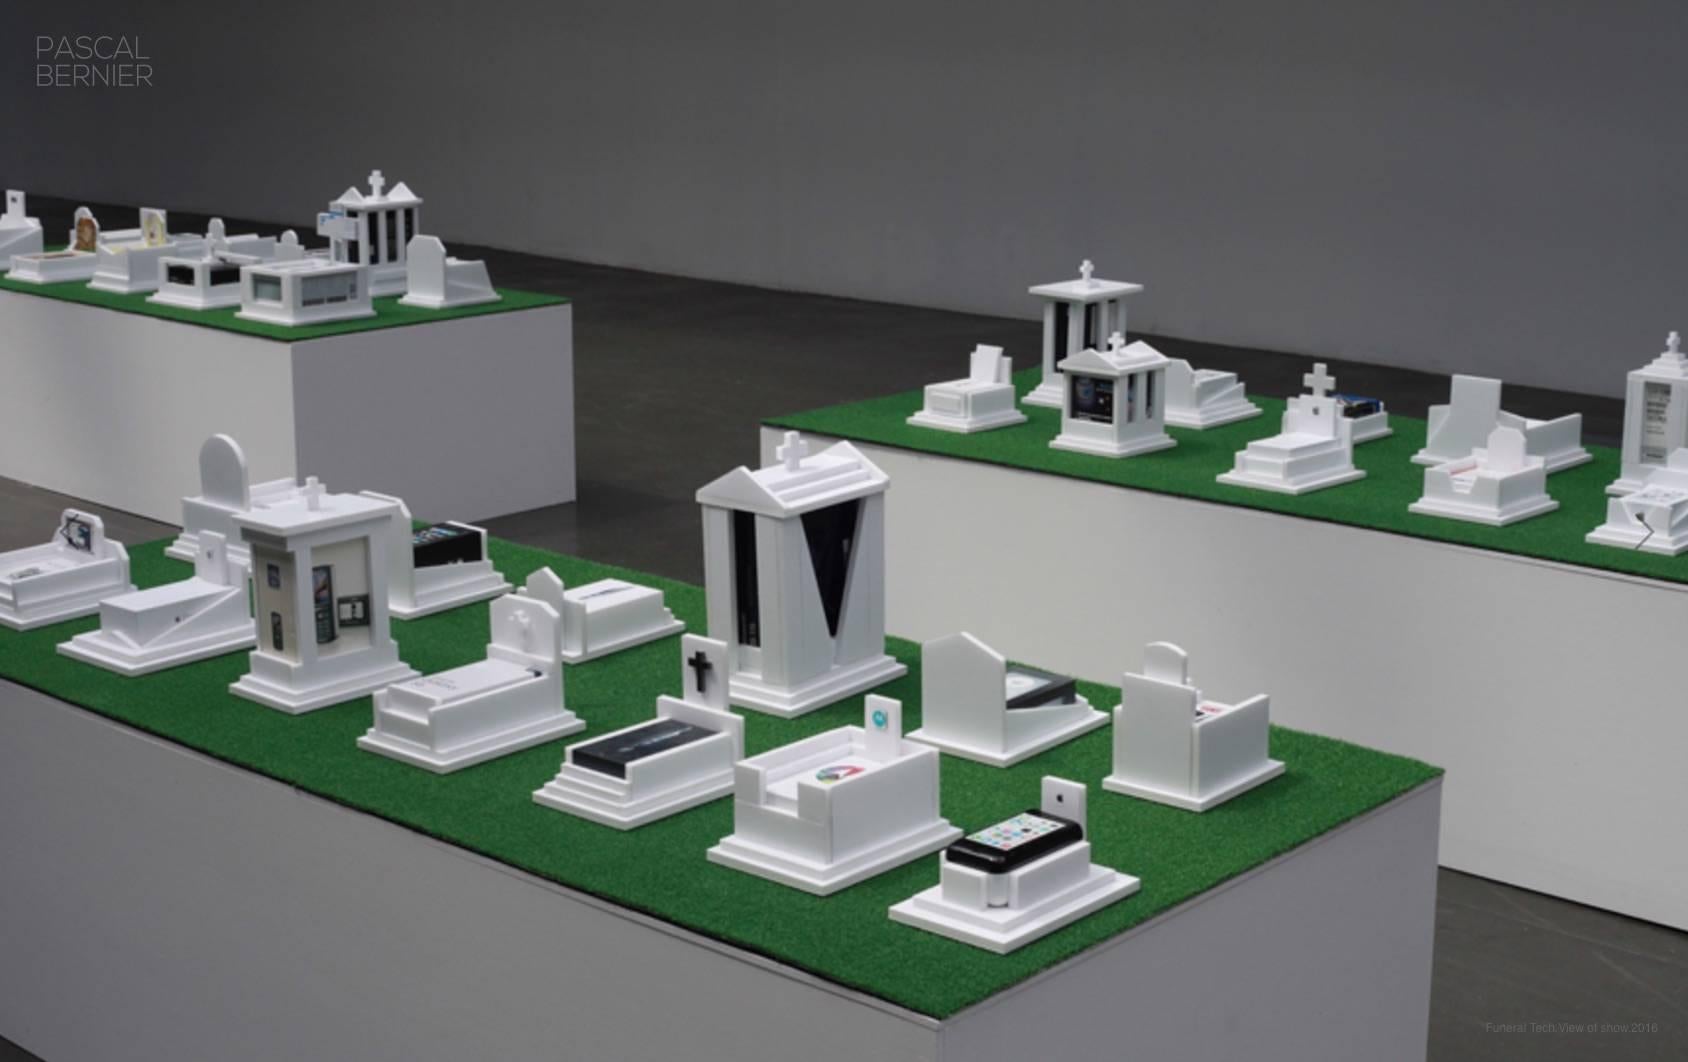 Funeral Tech is a series of marble tombs encasing technological product boxes. Light rolls seamlessly from the shiny packaging to the marble funeral architecture, confounding technology with eternal rest.

Pascal Bernier, born in Brussels, Belgium,